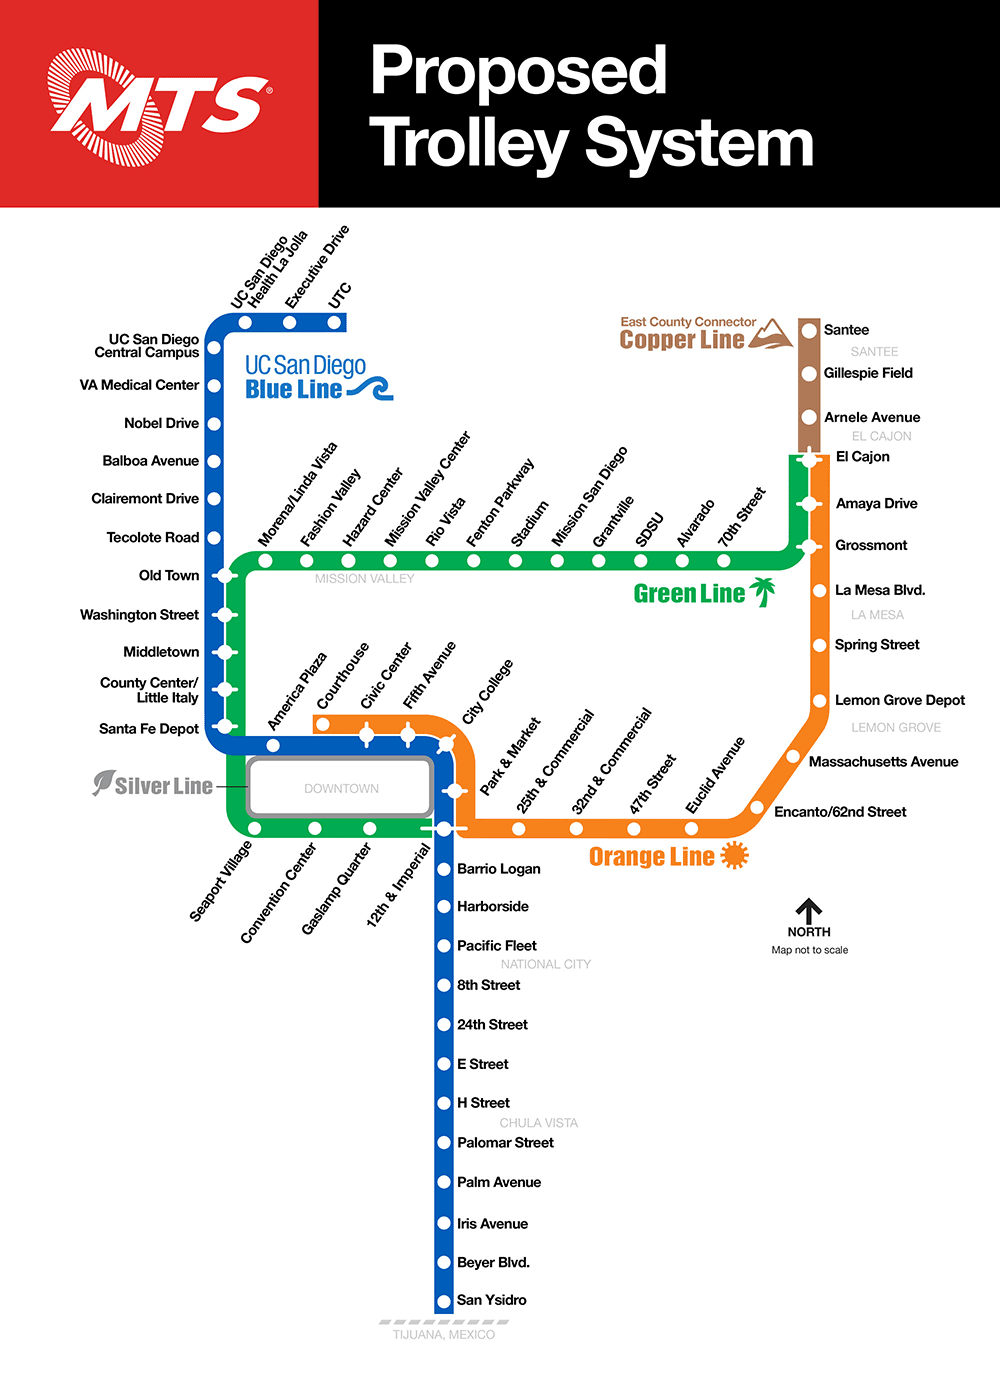 Proposed Trolley System Map which includes the Copper Line stations from El Cajon to Santee